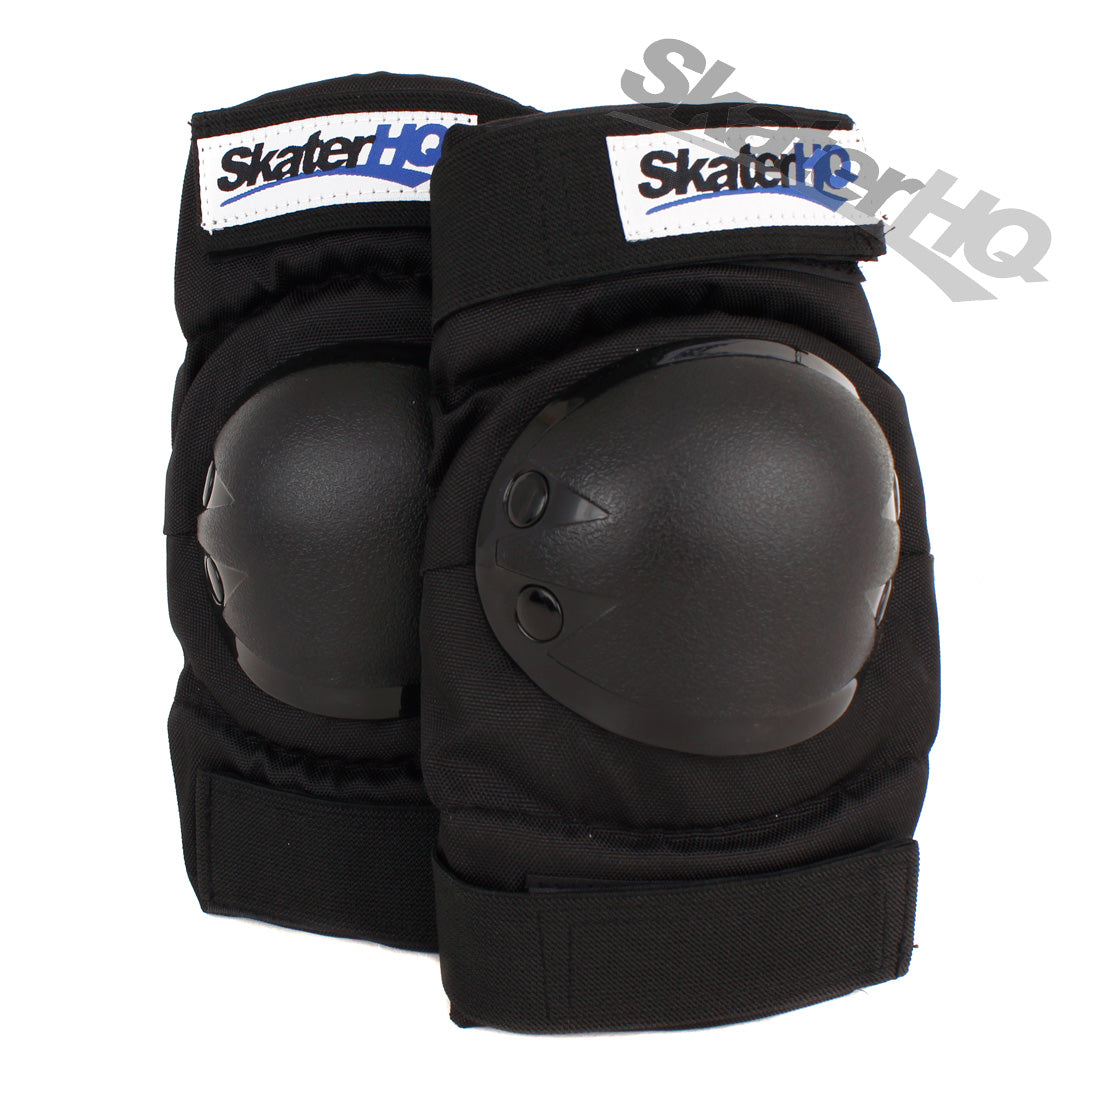 Skater HQ Elbow Pads - Large Protective Gear